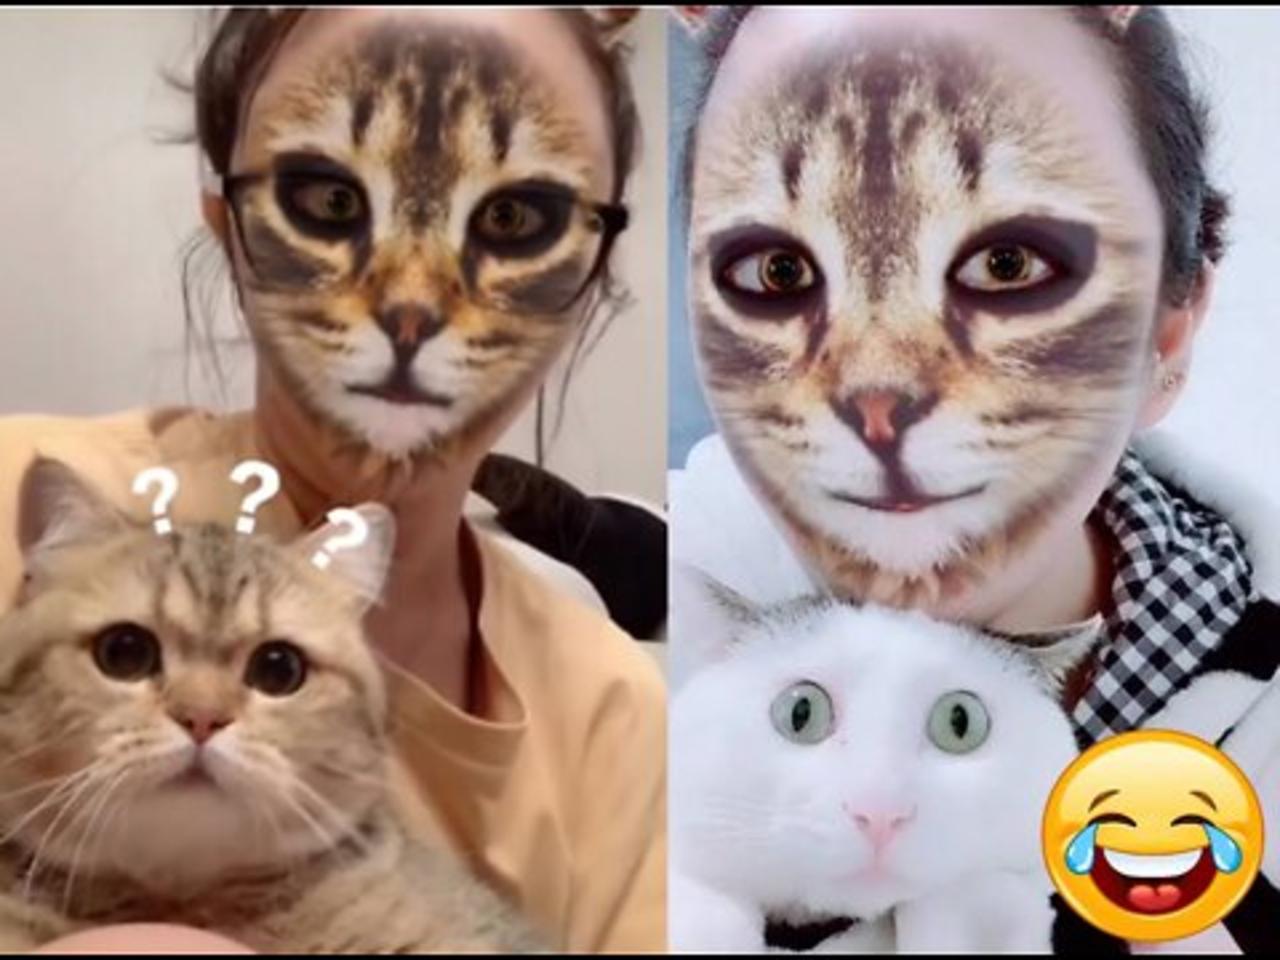 Cats Reaction with Cat Filter - 😂 Funny Video 😂 - Try not to laugh